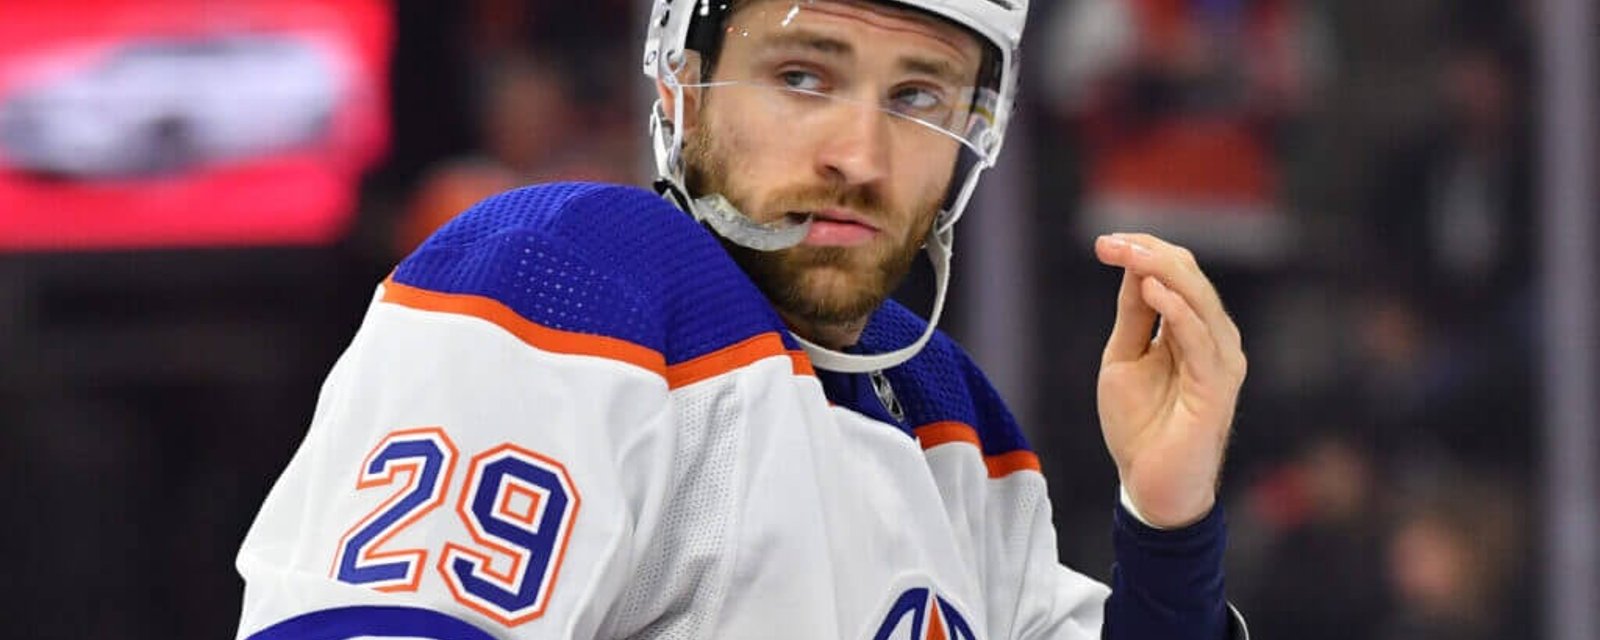 Leon Draisaitl flirting with rival club amidst free agency rumours & during playoffs!